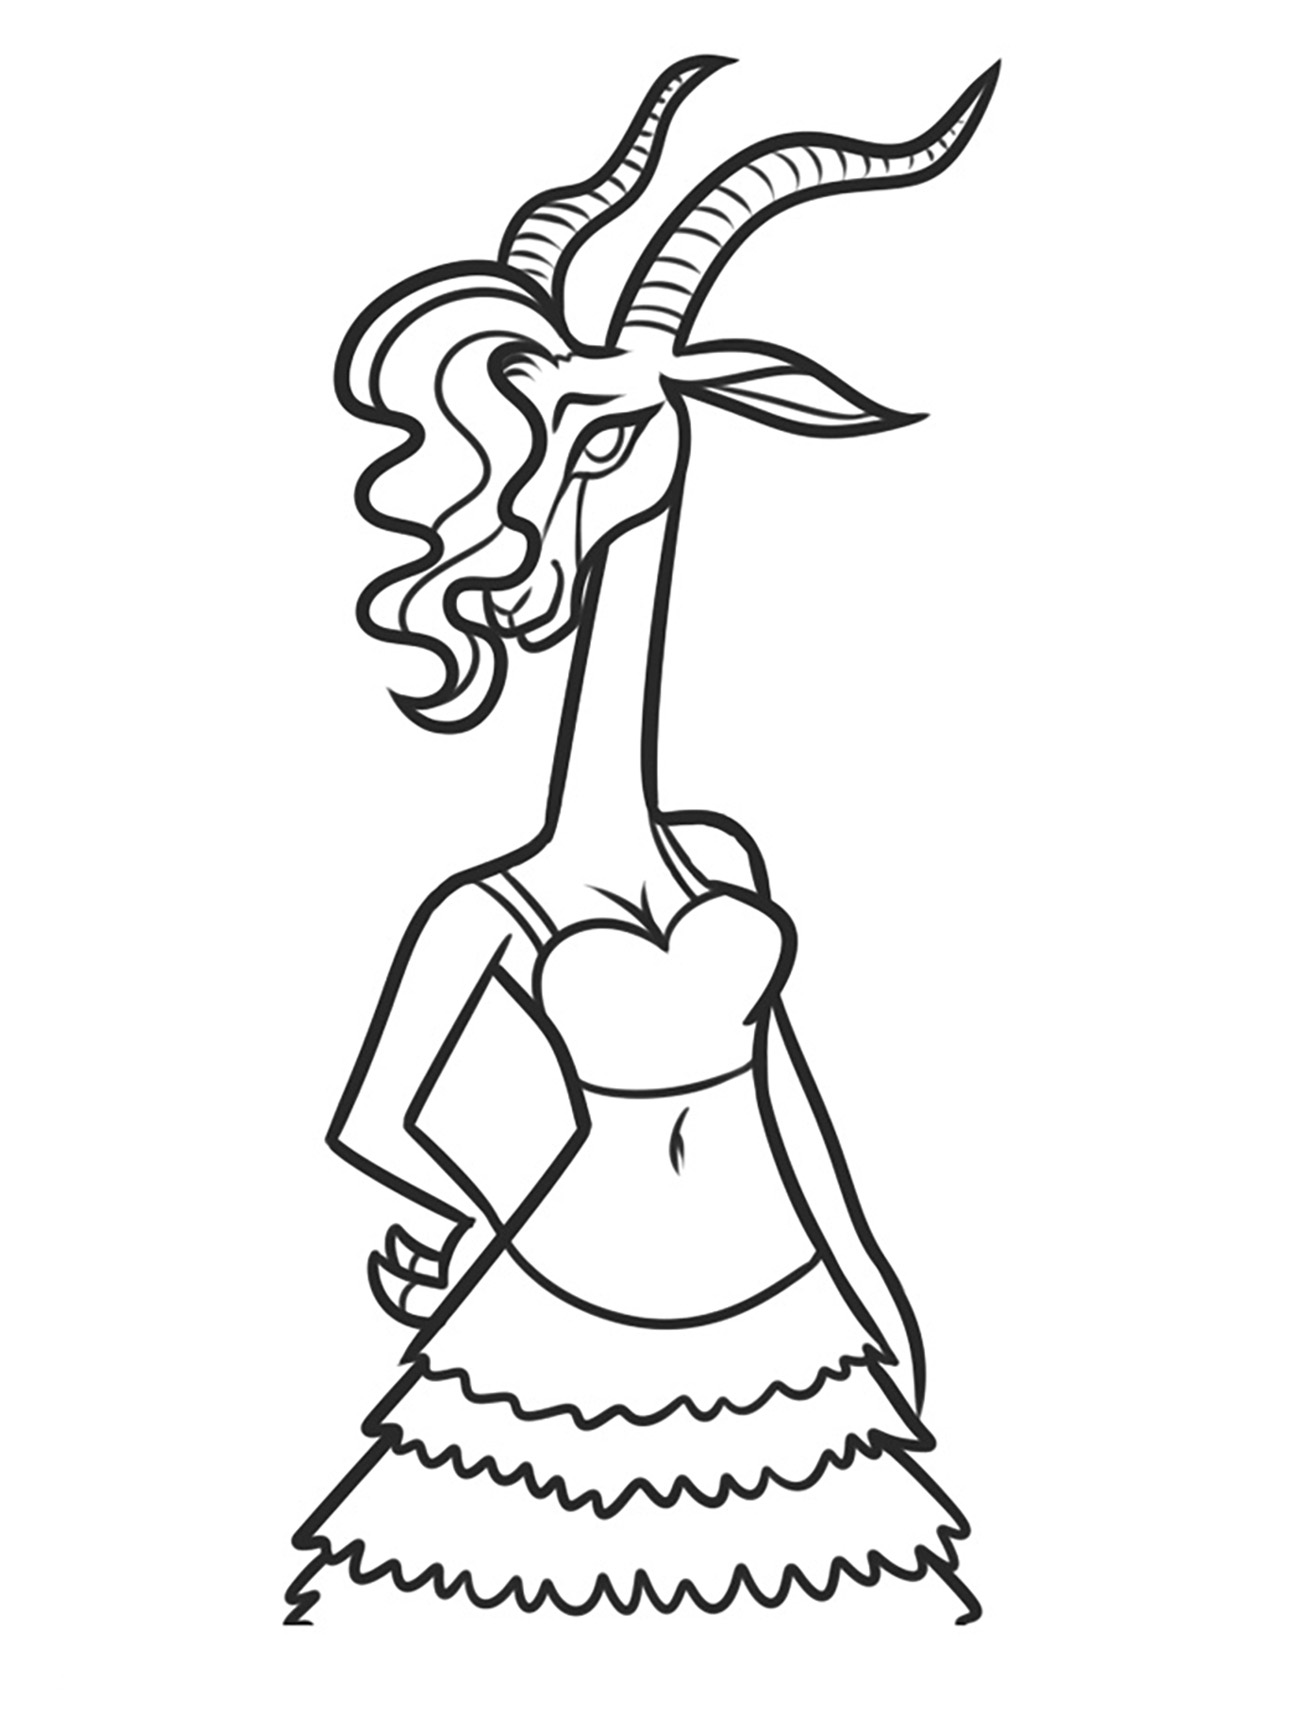 Simple Zootopia coloring page to print and color for free : Gazelle (Shakira)